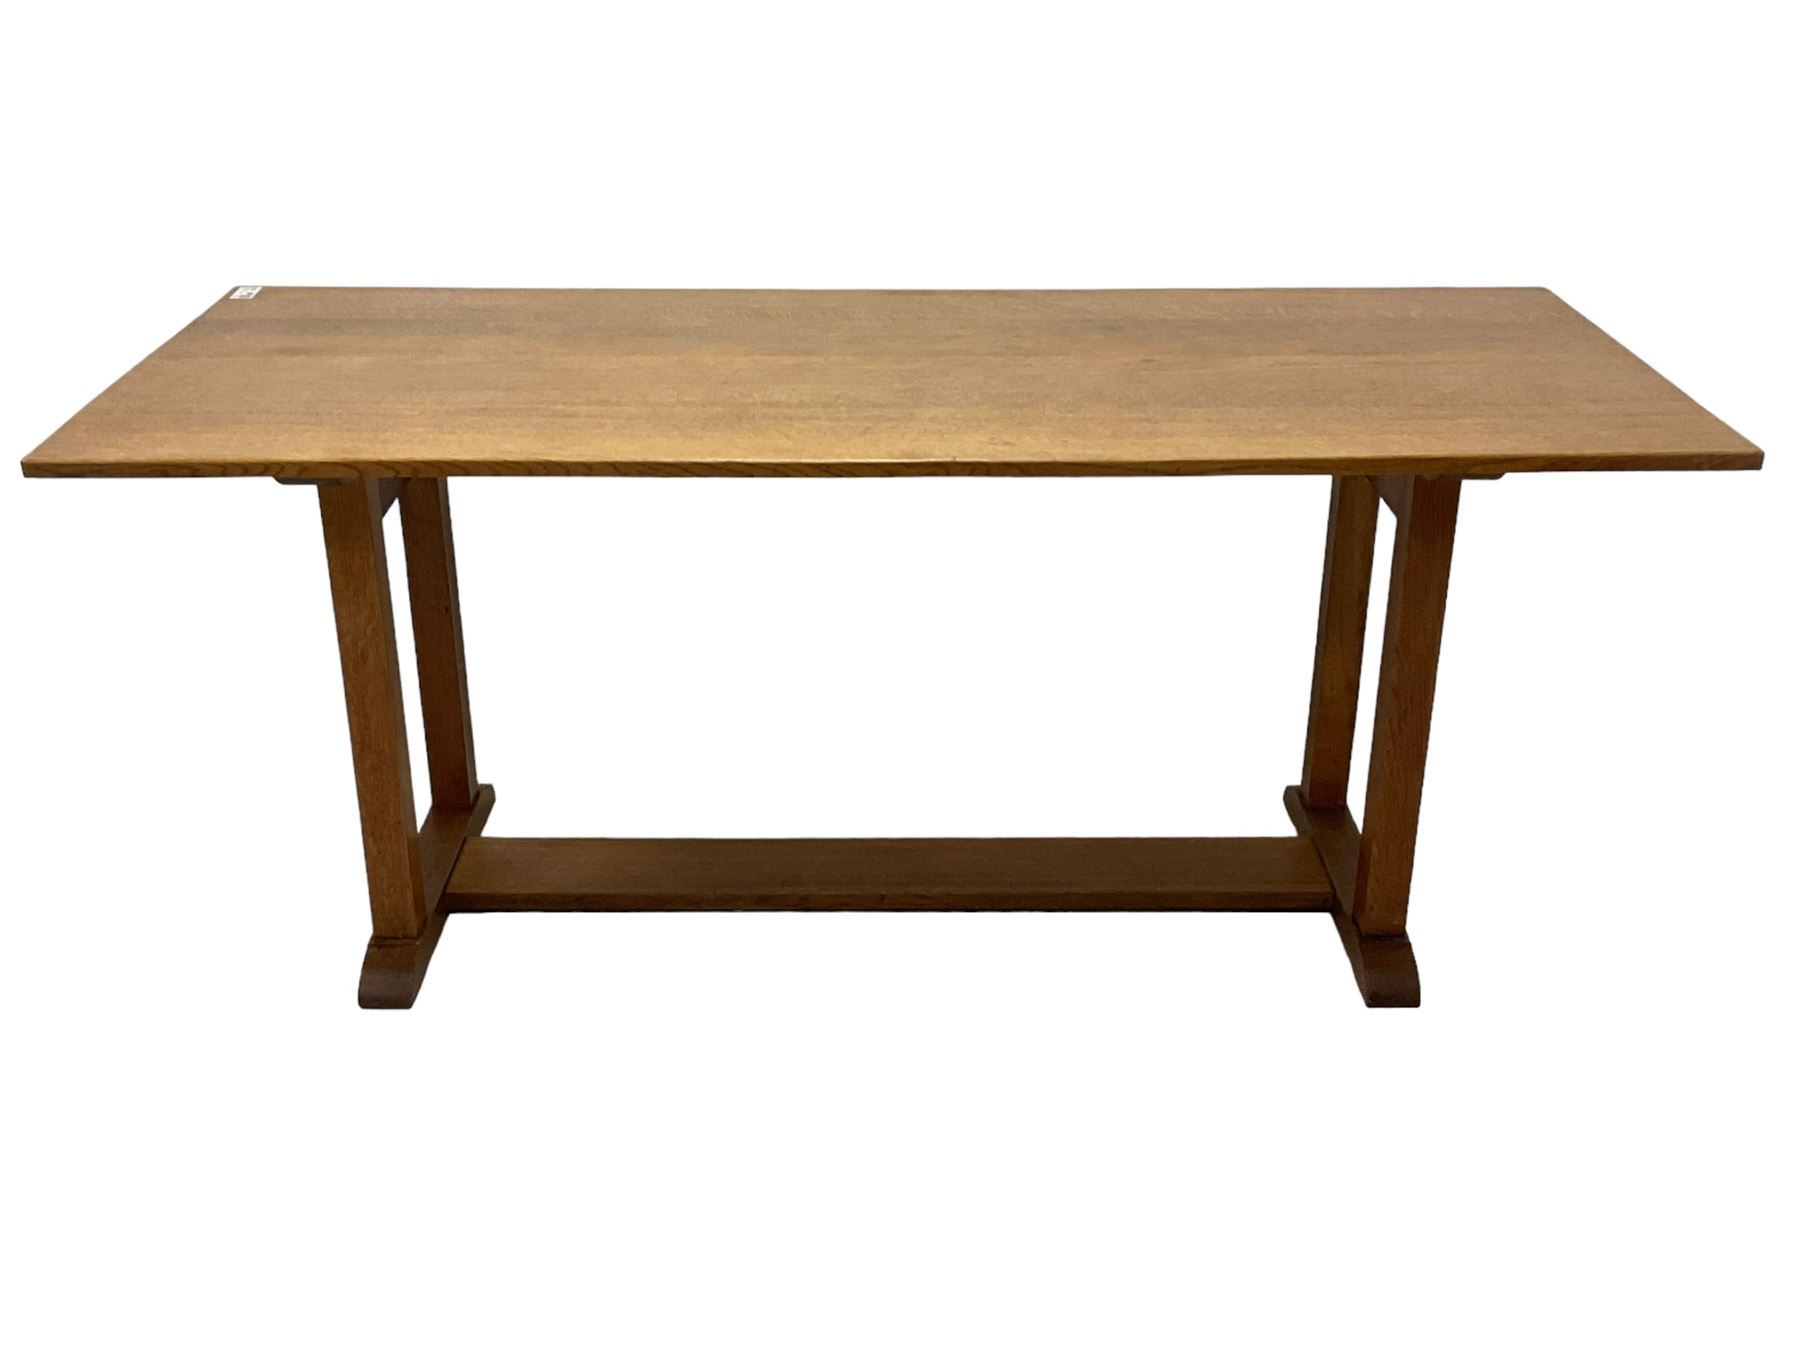 Gordon Russell - circa. 1930s oak refectory dining table - Image 5 of 9